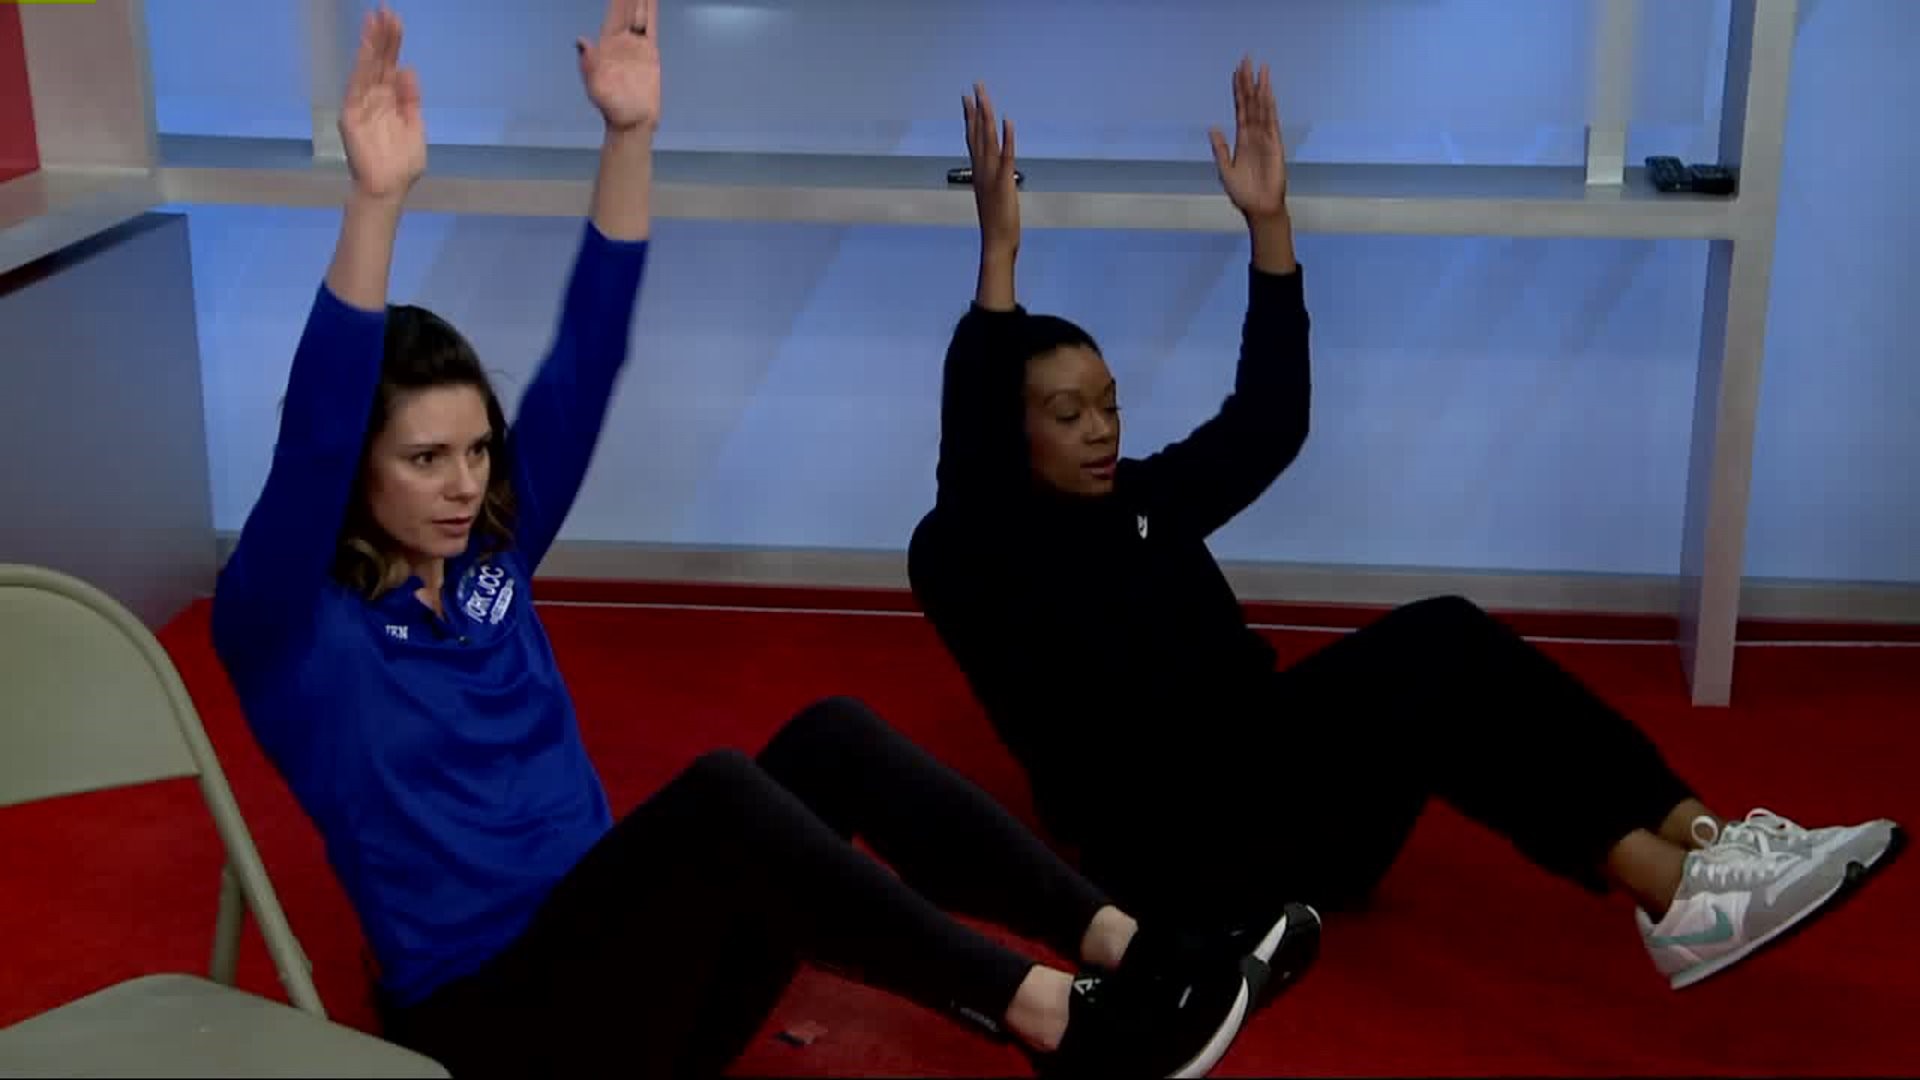 Live UP!: Staying fit and active during the holiday season